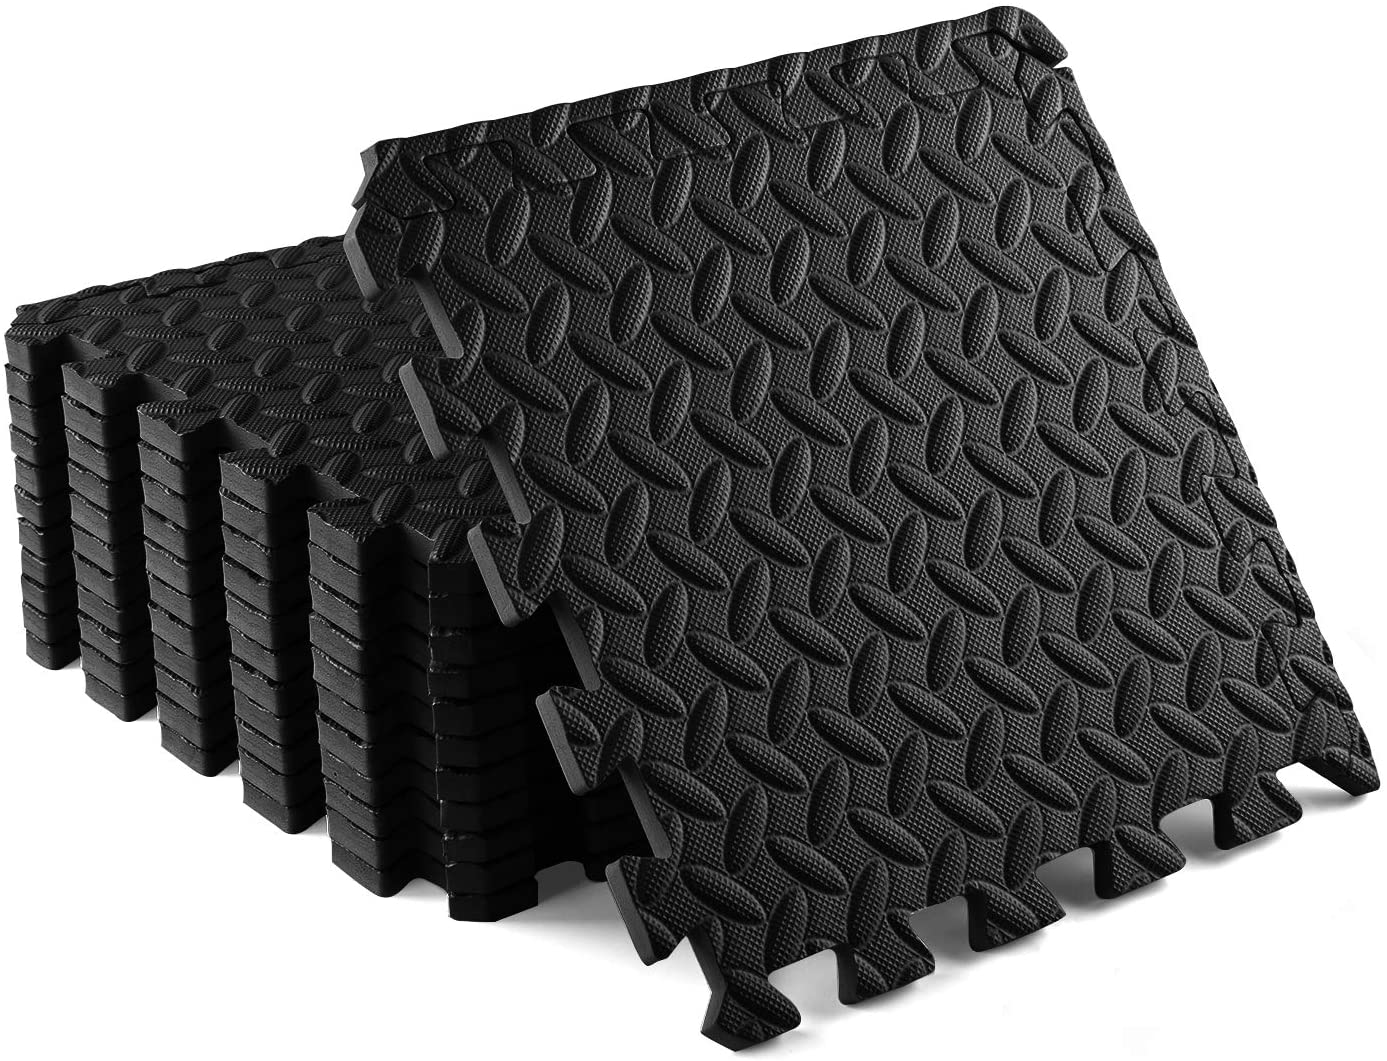 Yes4All 12 pcs Interlocking Exercise Foam Mats, Cover 12 sqft, 3/8 inch Thick, Black Color - image 1 of 7